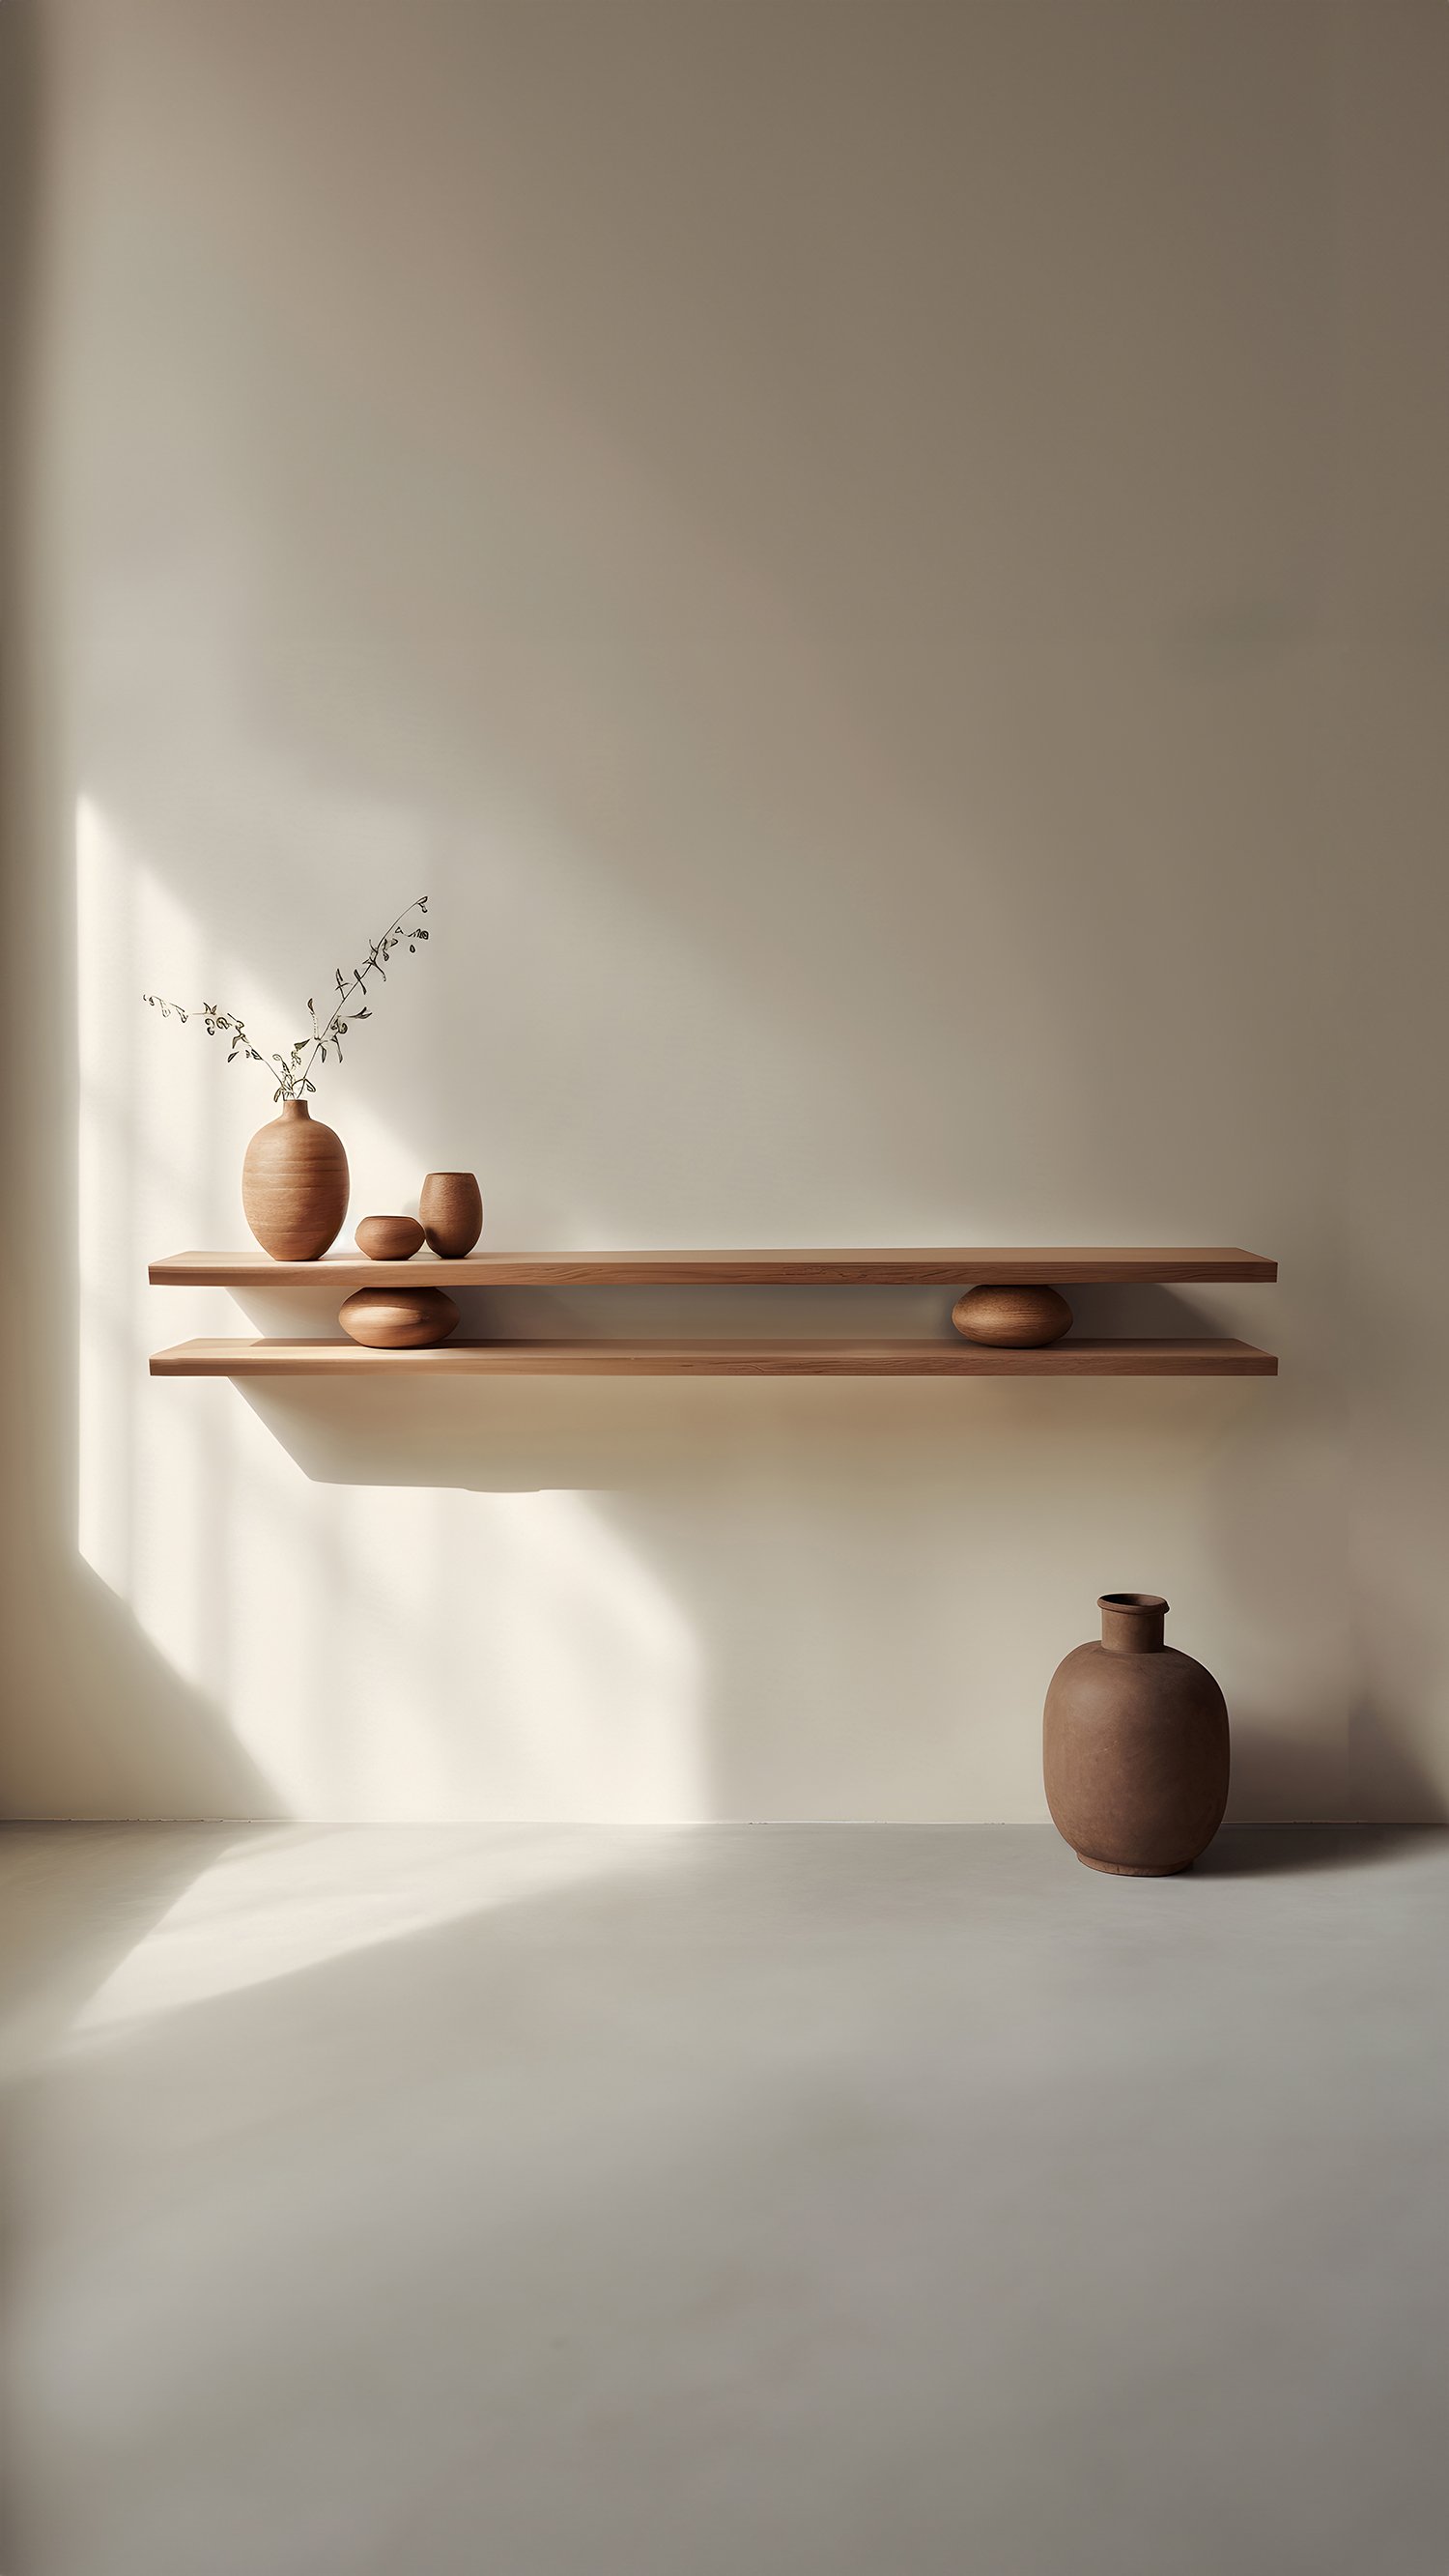 Set of Two Large Floating Shelves with Two Sculptural Wooden Pebble Accents in the Middle, Sereno by Joel Escalona —6.jpg